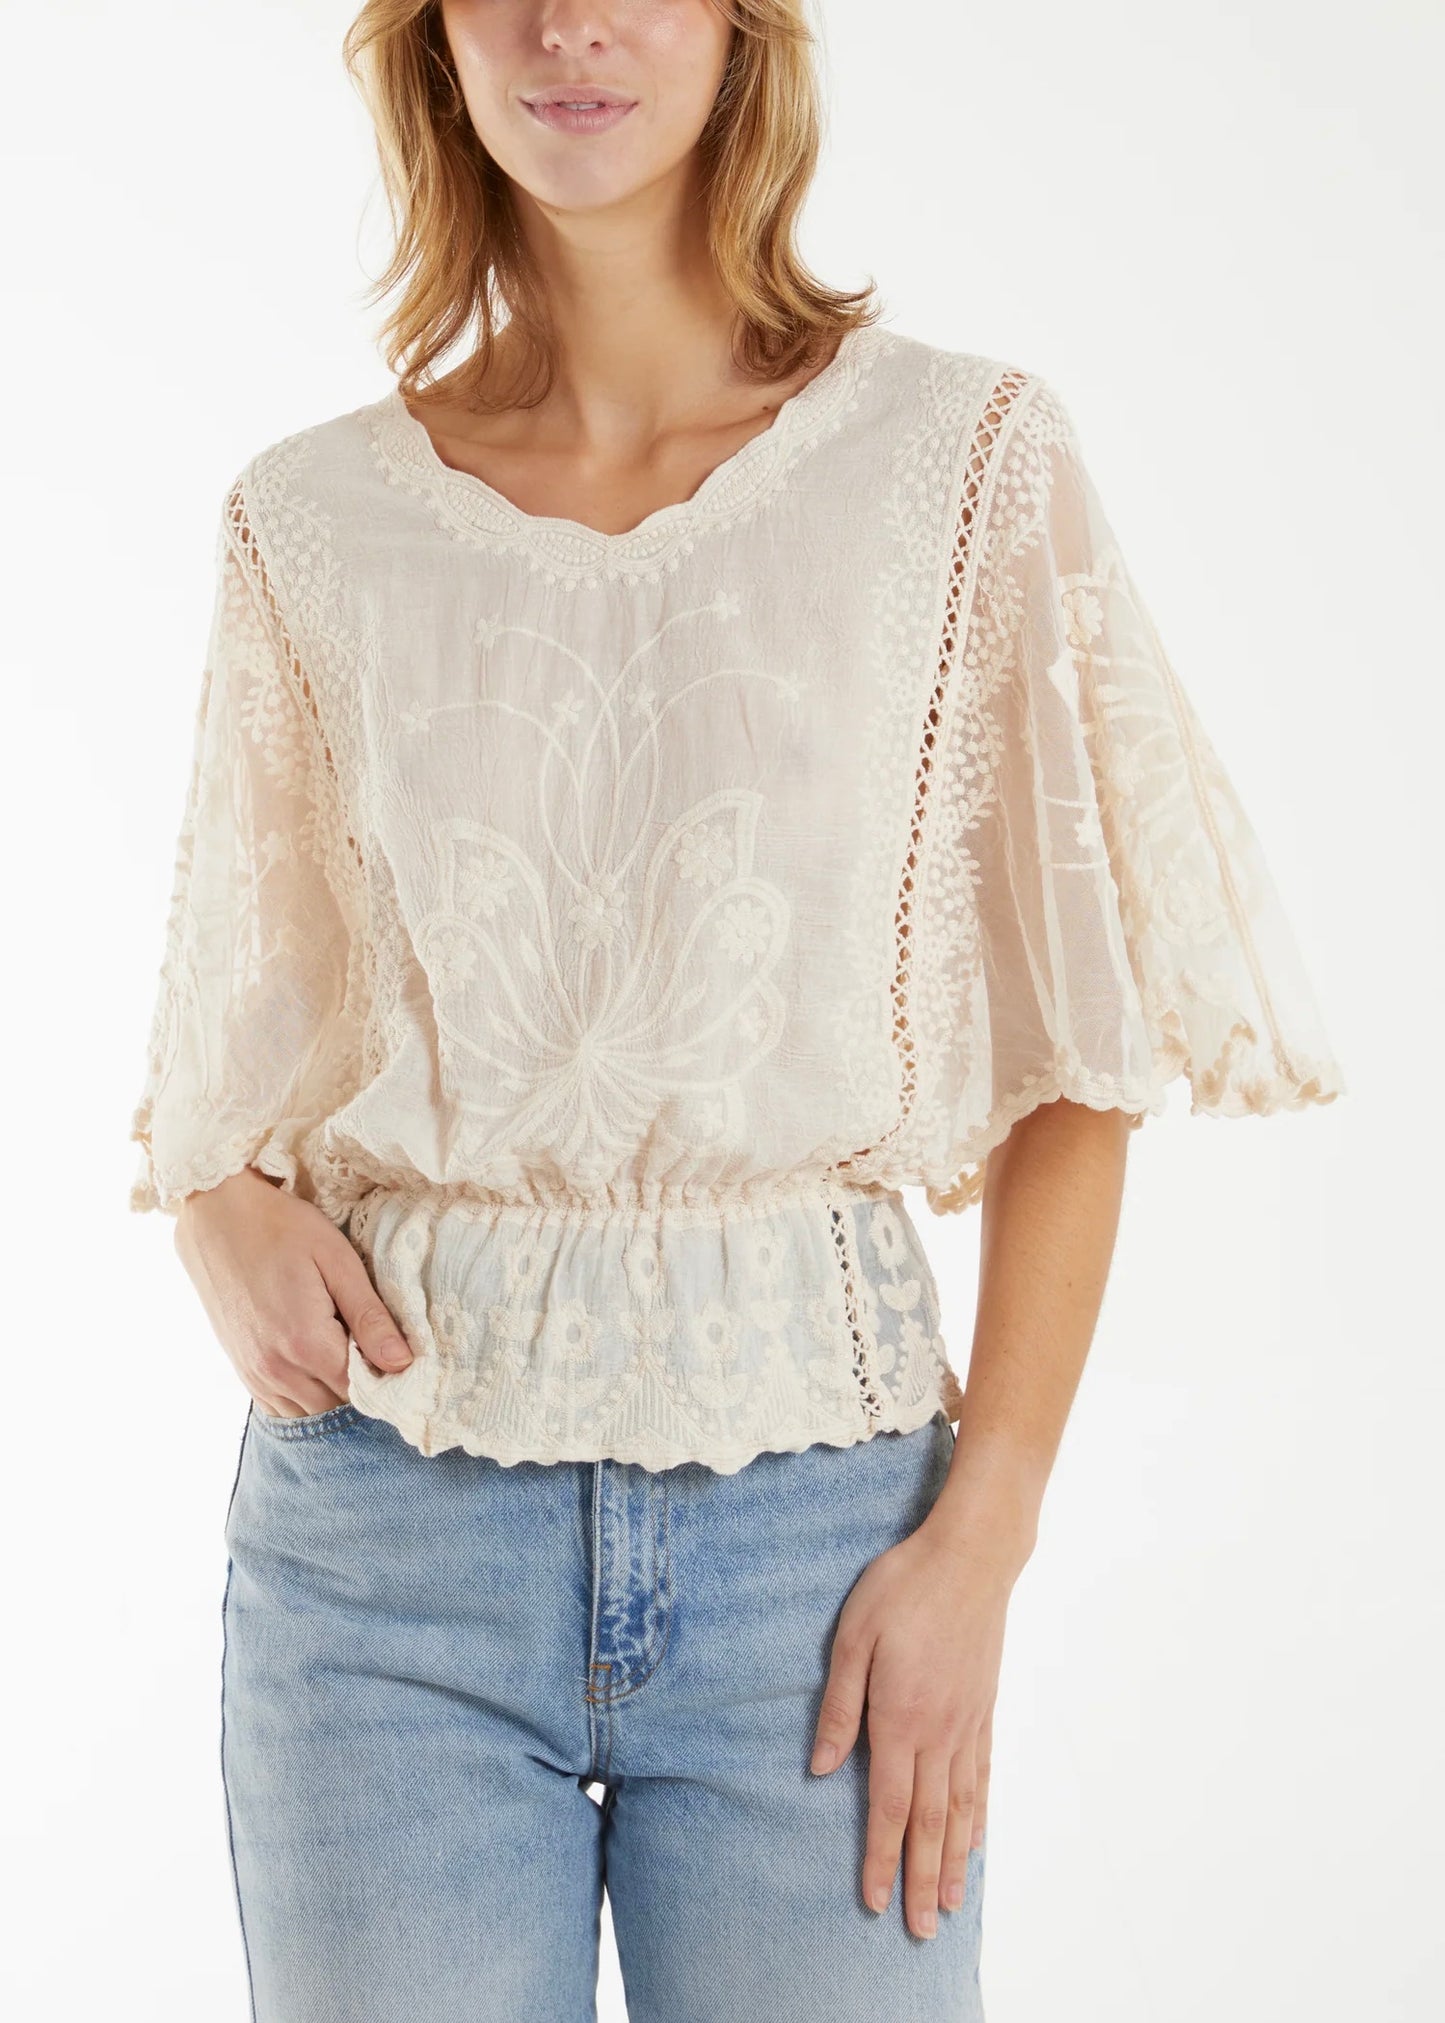 Sands - Butterfly Lace Top / Stone